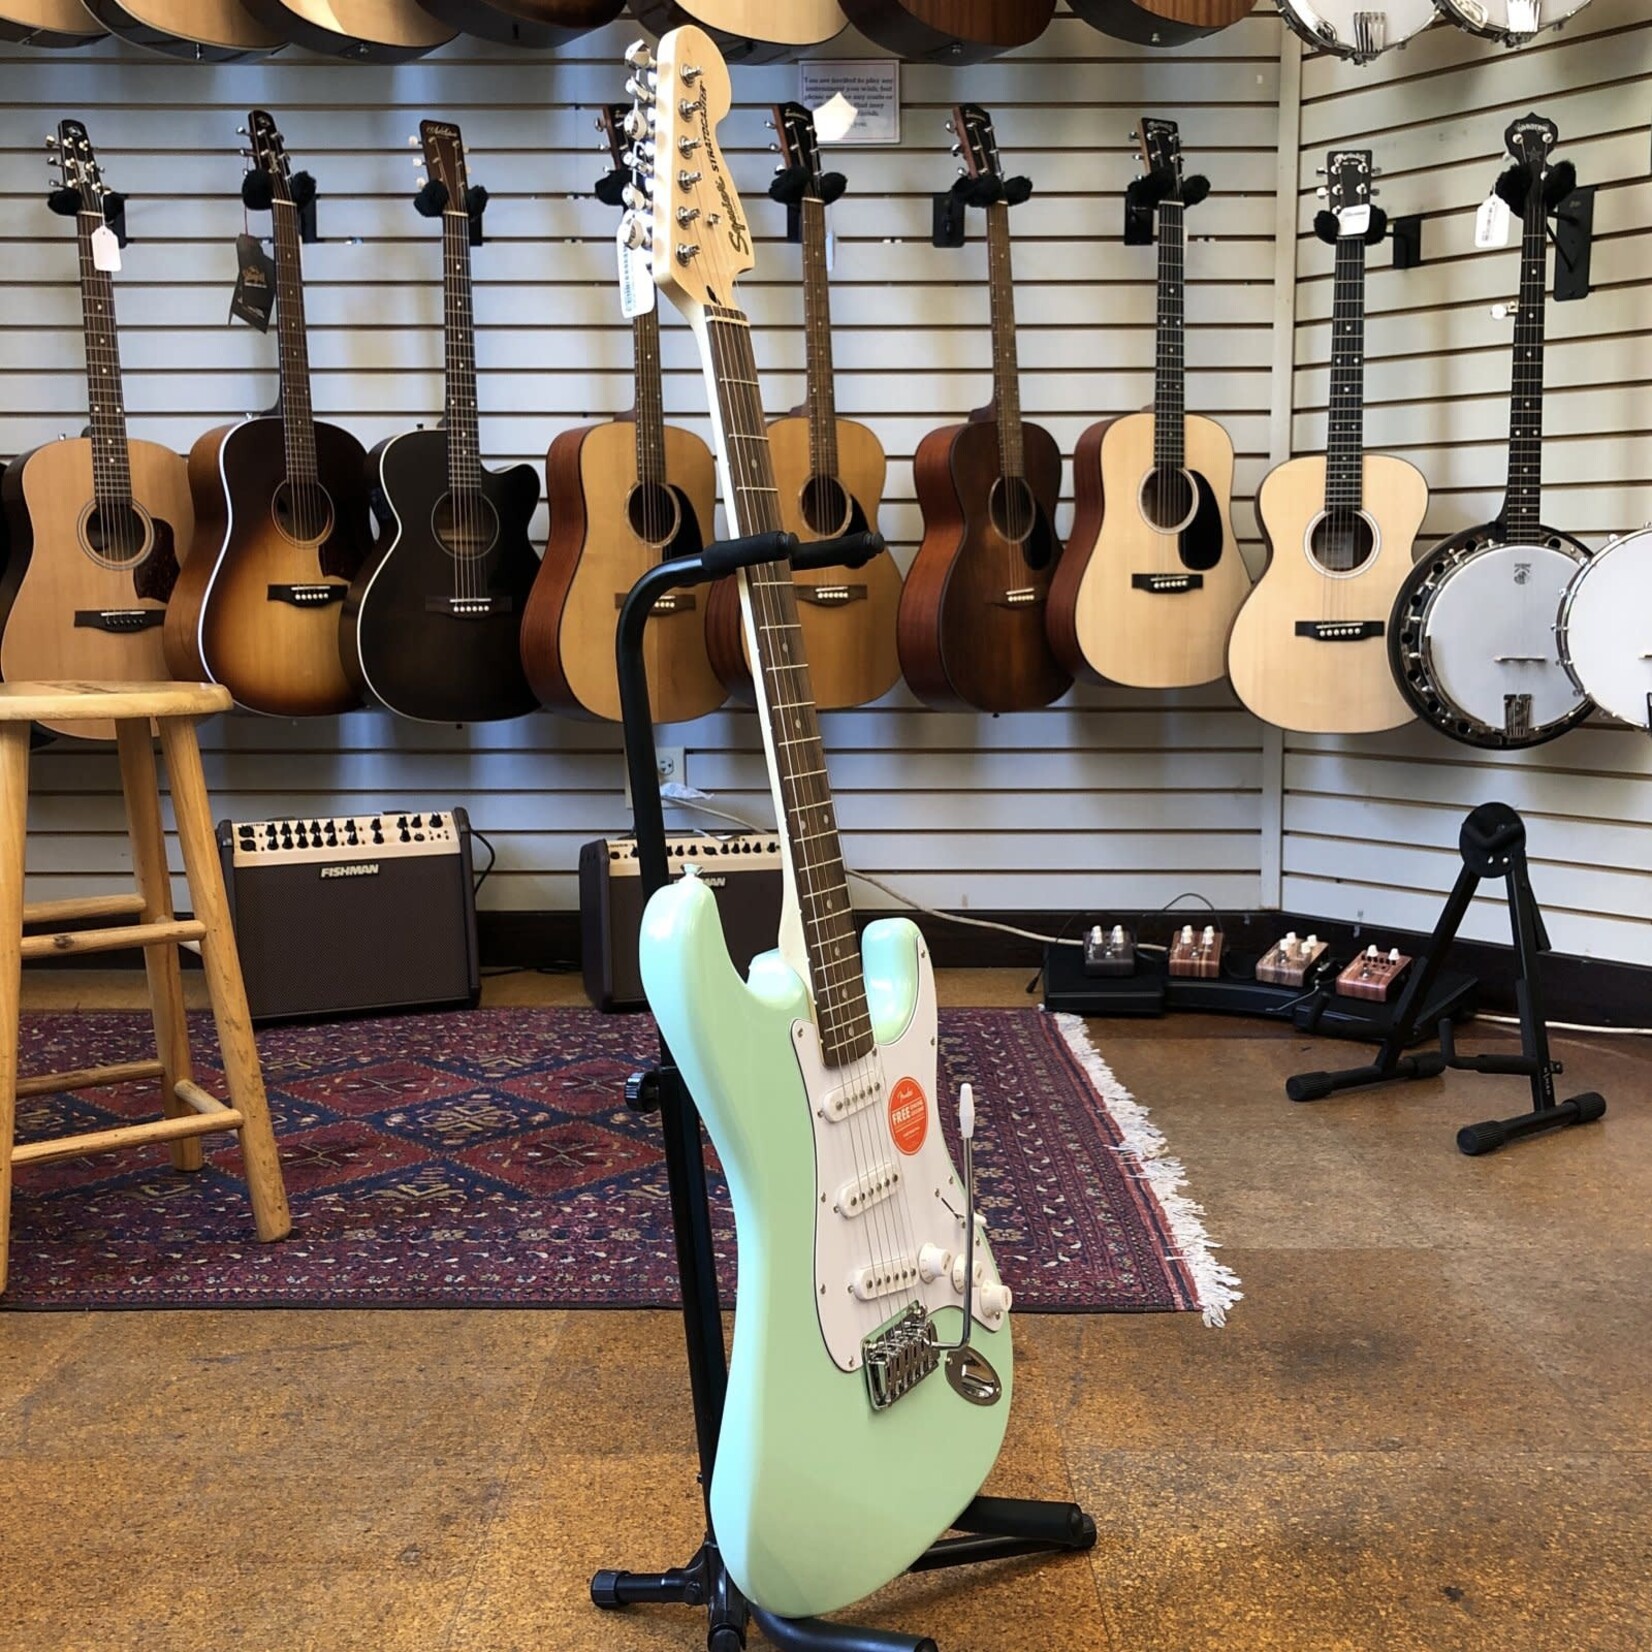 Squier Squier Affinity Series Stratocaster Surf Green w/Indian Laurel Fingerboard